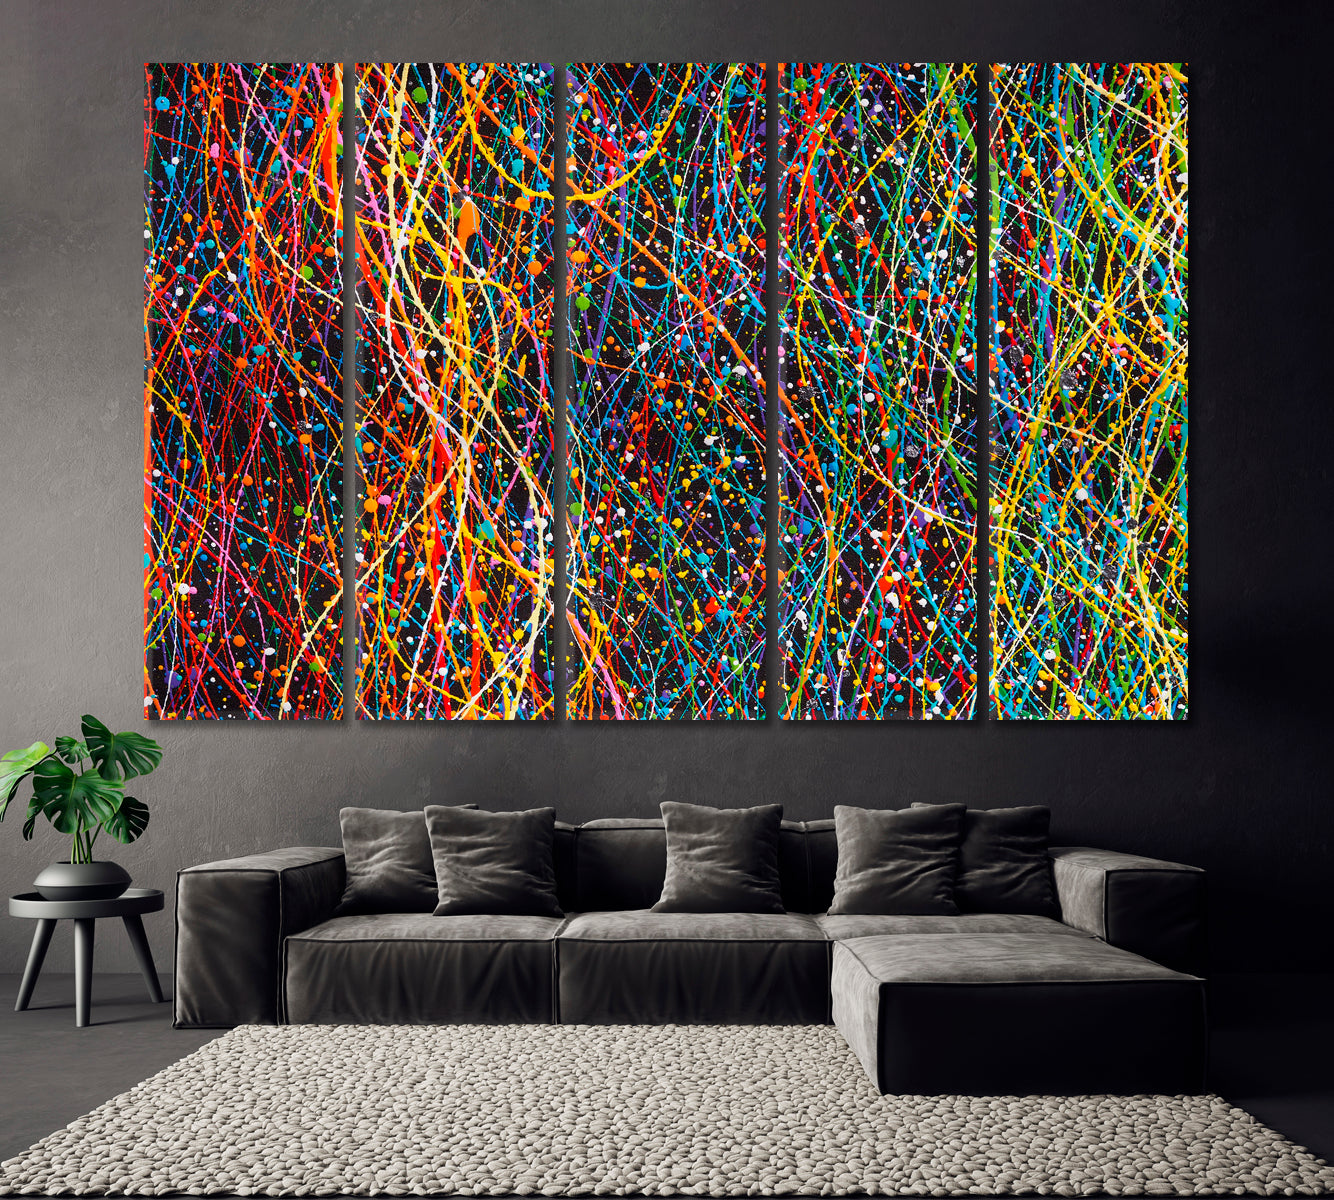 Splash of Colorful Ink Canvas Print ArtLexy 5 Panels 36"x24" inches 